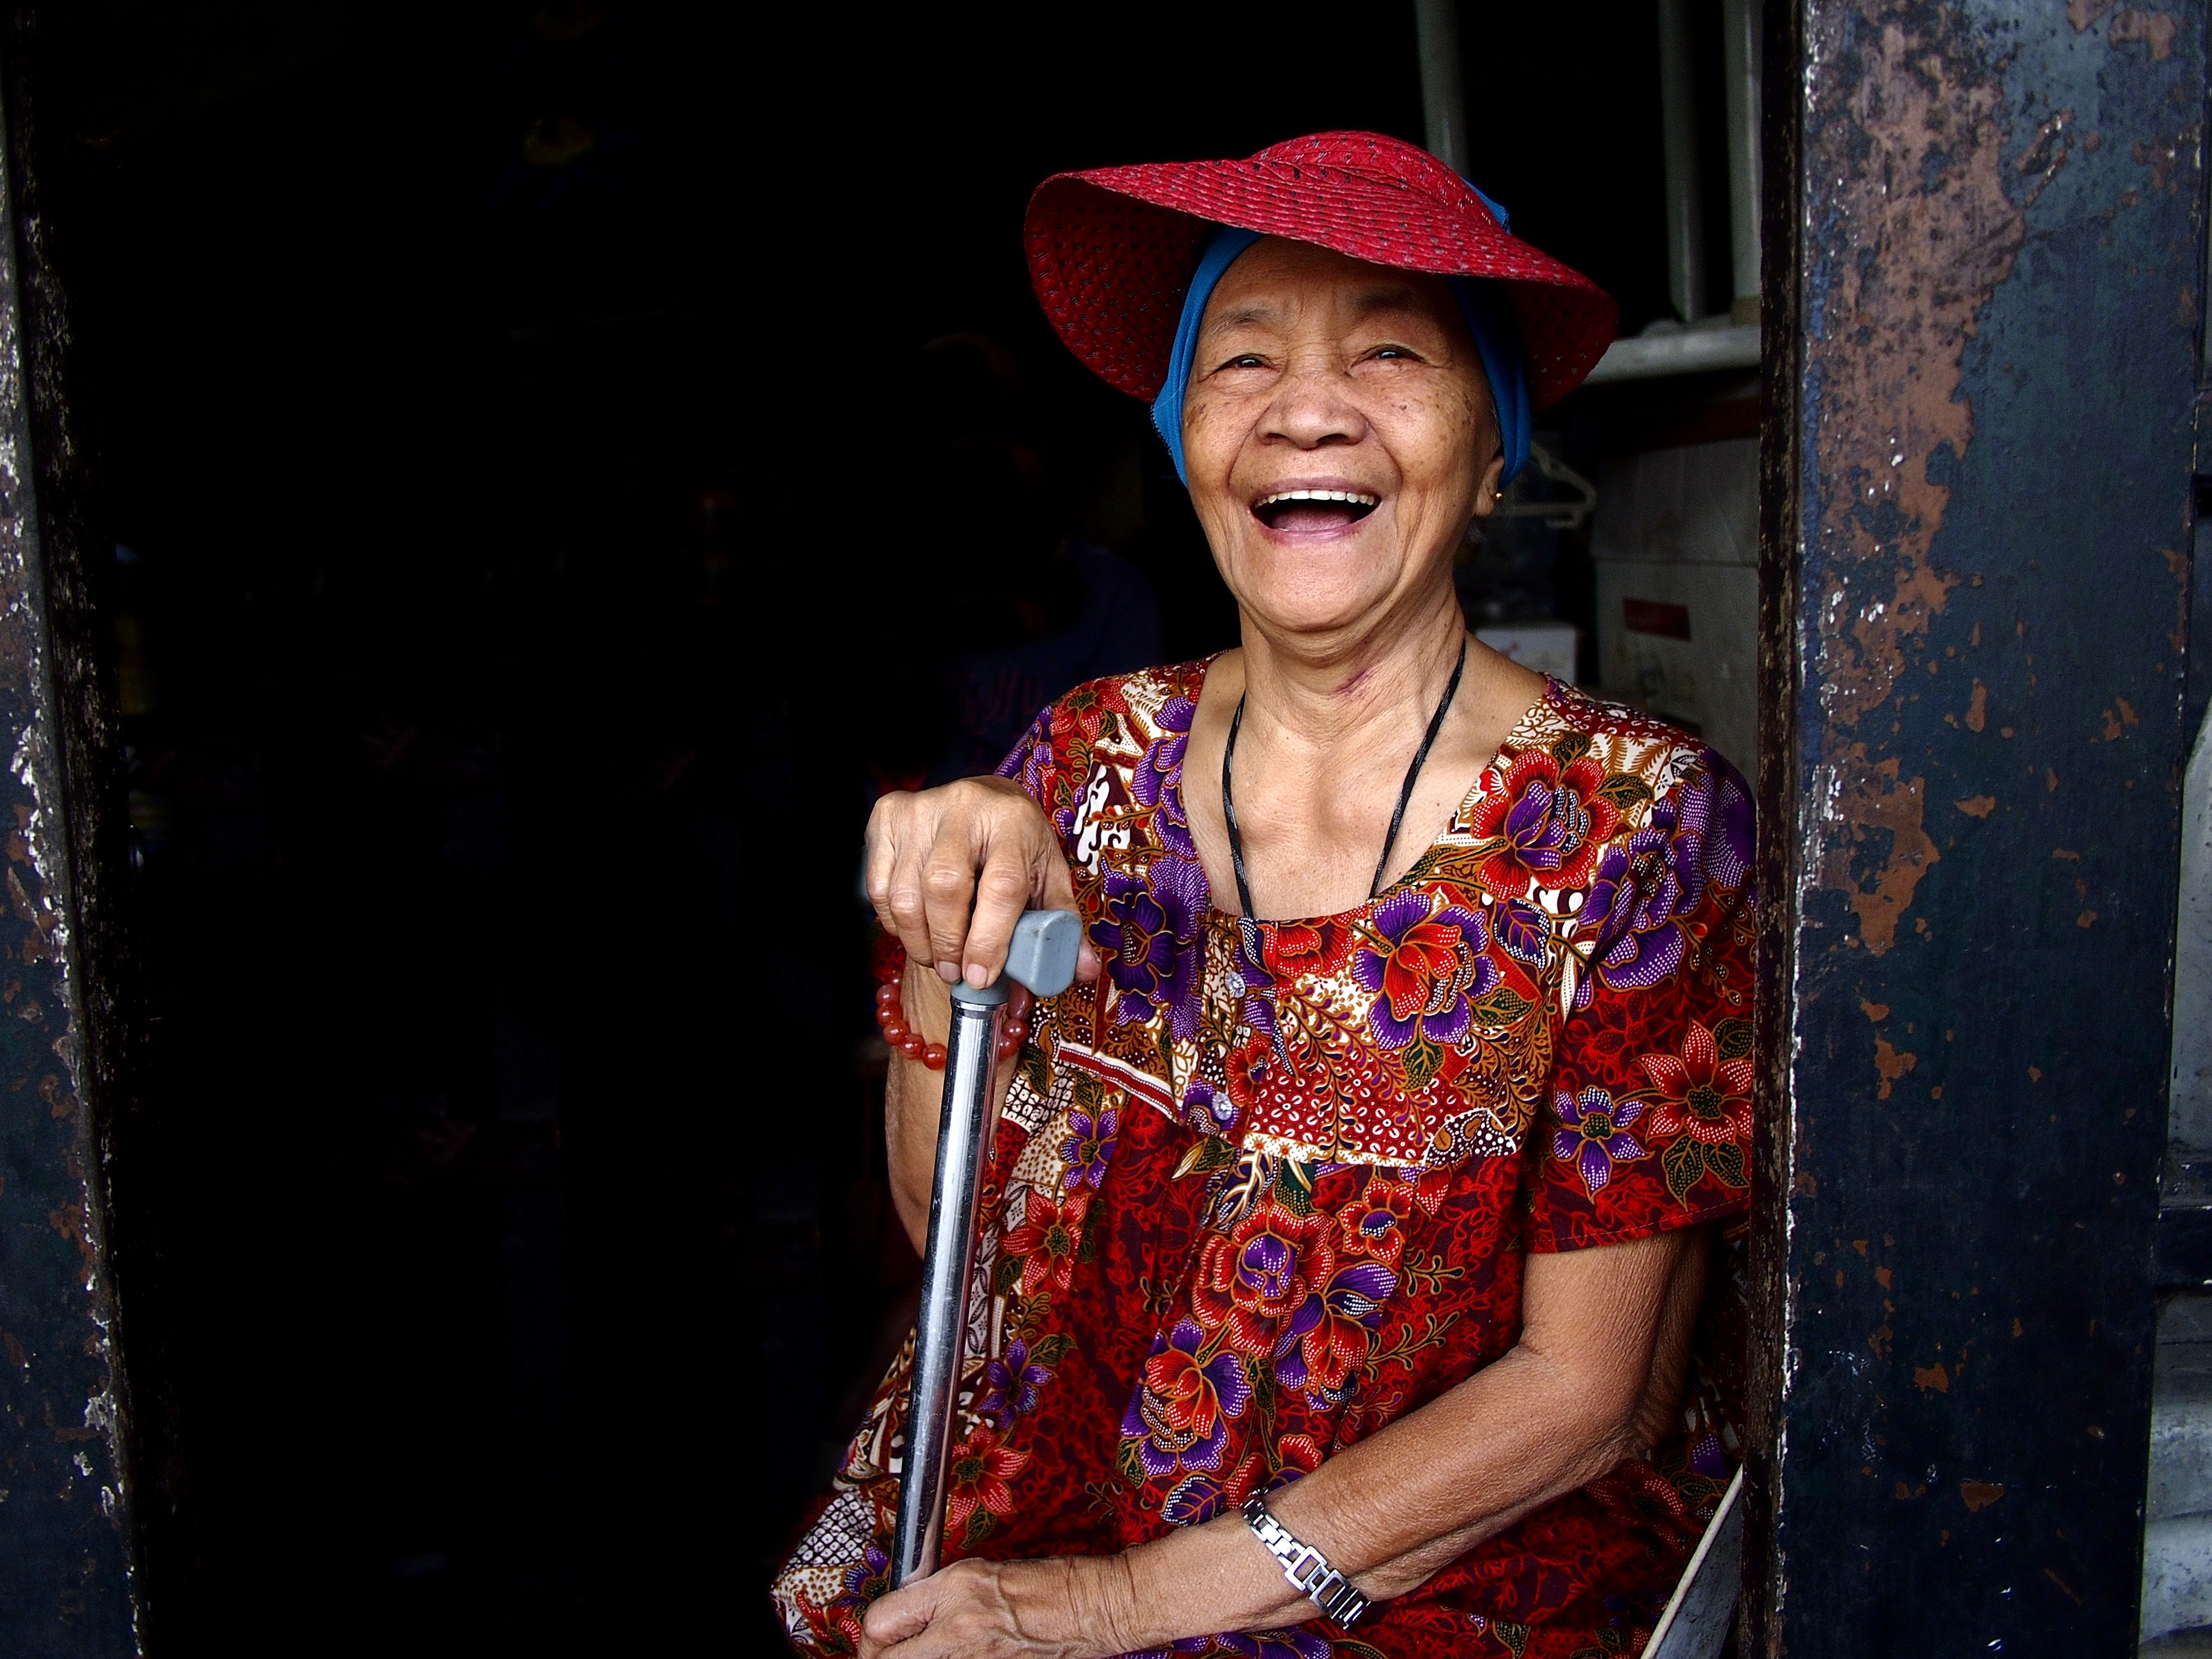 Woman smiling in Philippines holding a cane